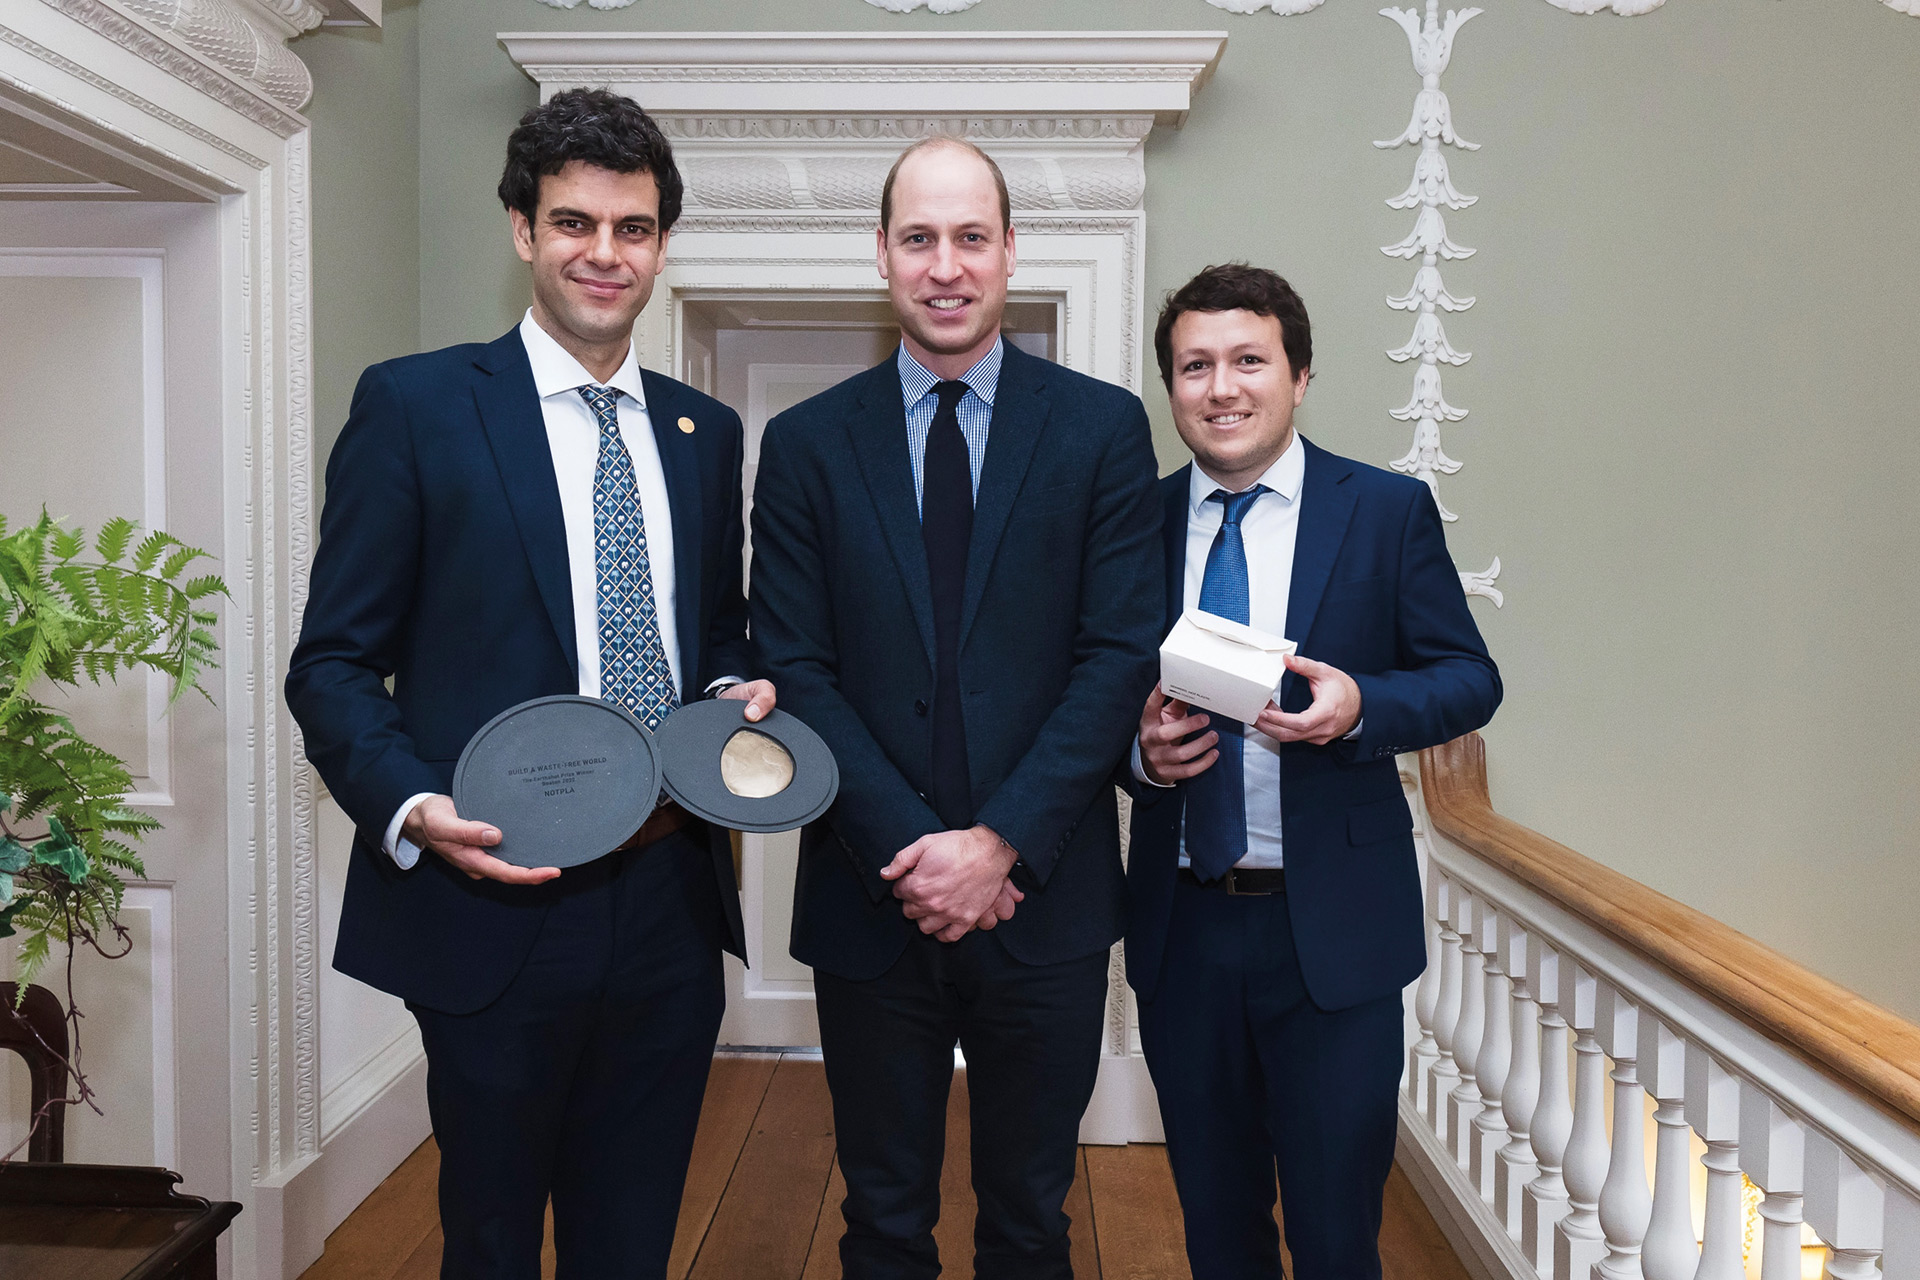 Notpla founders holding their trophies next to Prince William at the Earthshot Prize board meeting.